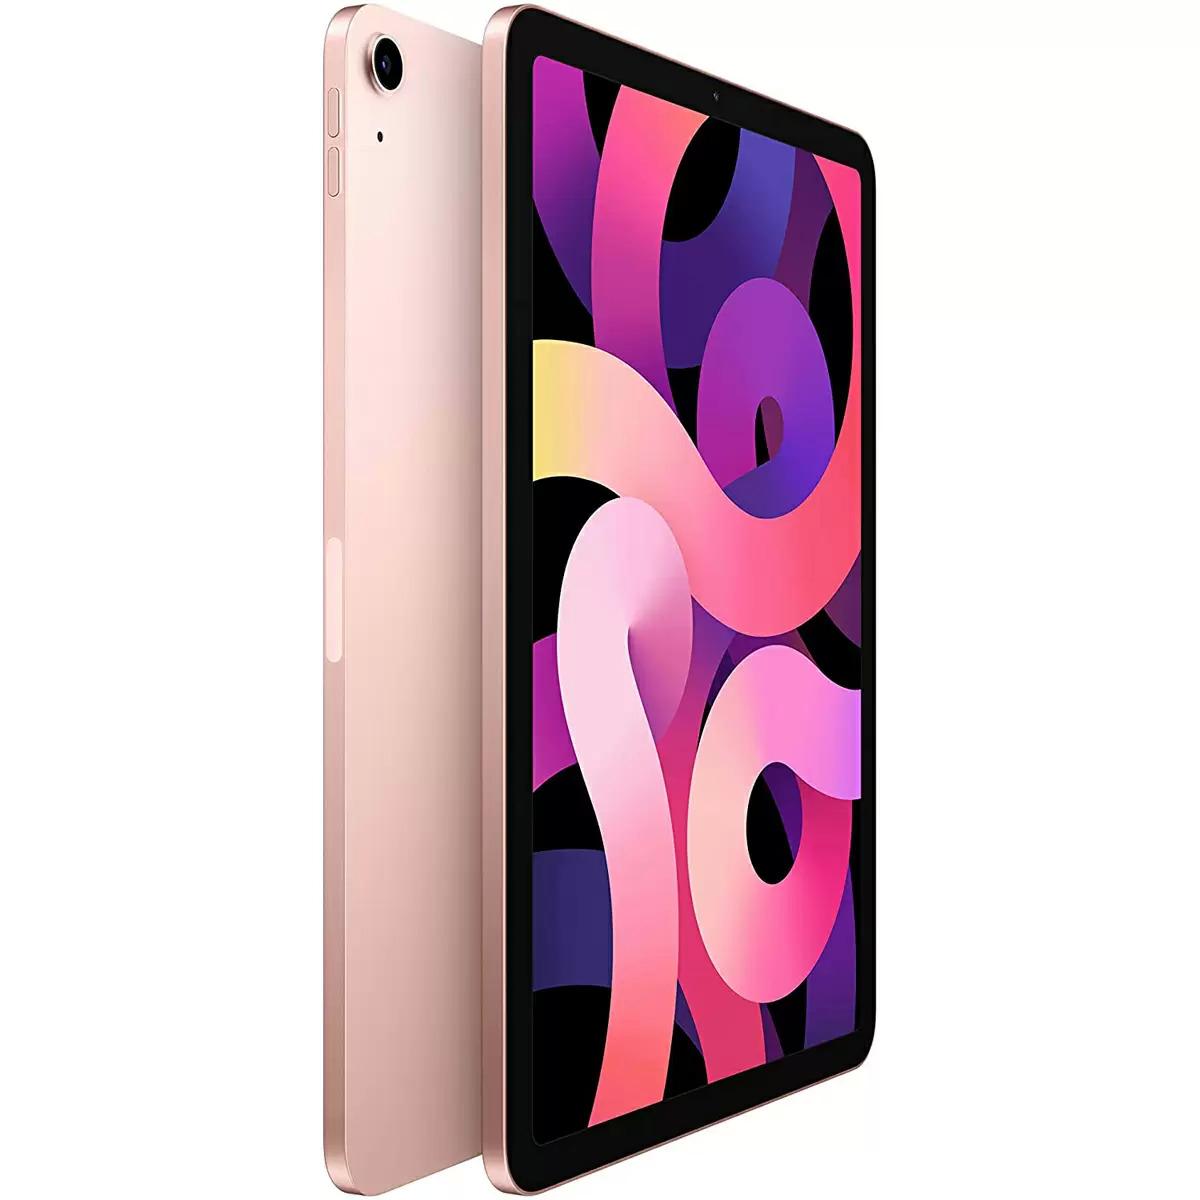 256GB 10.9" Apple iPad Air Wi-Fi Rose Gold Tablet for $649.99 Shipped